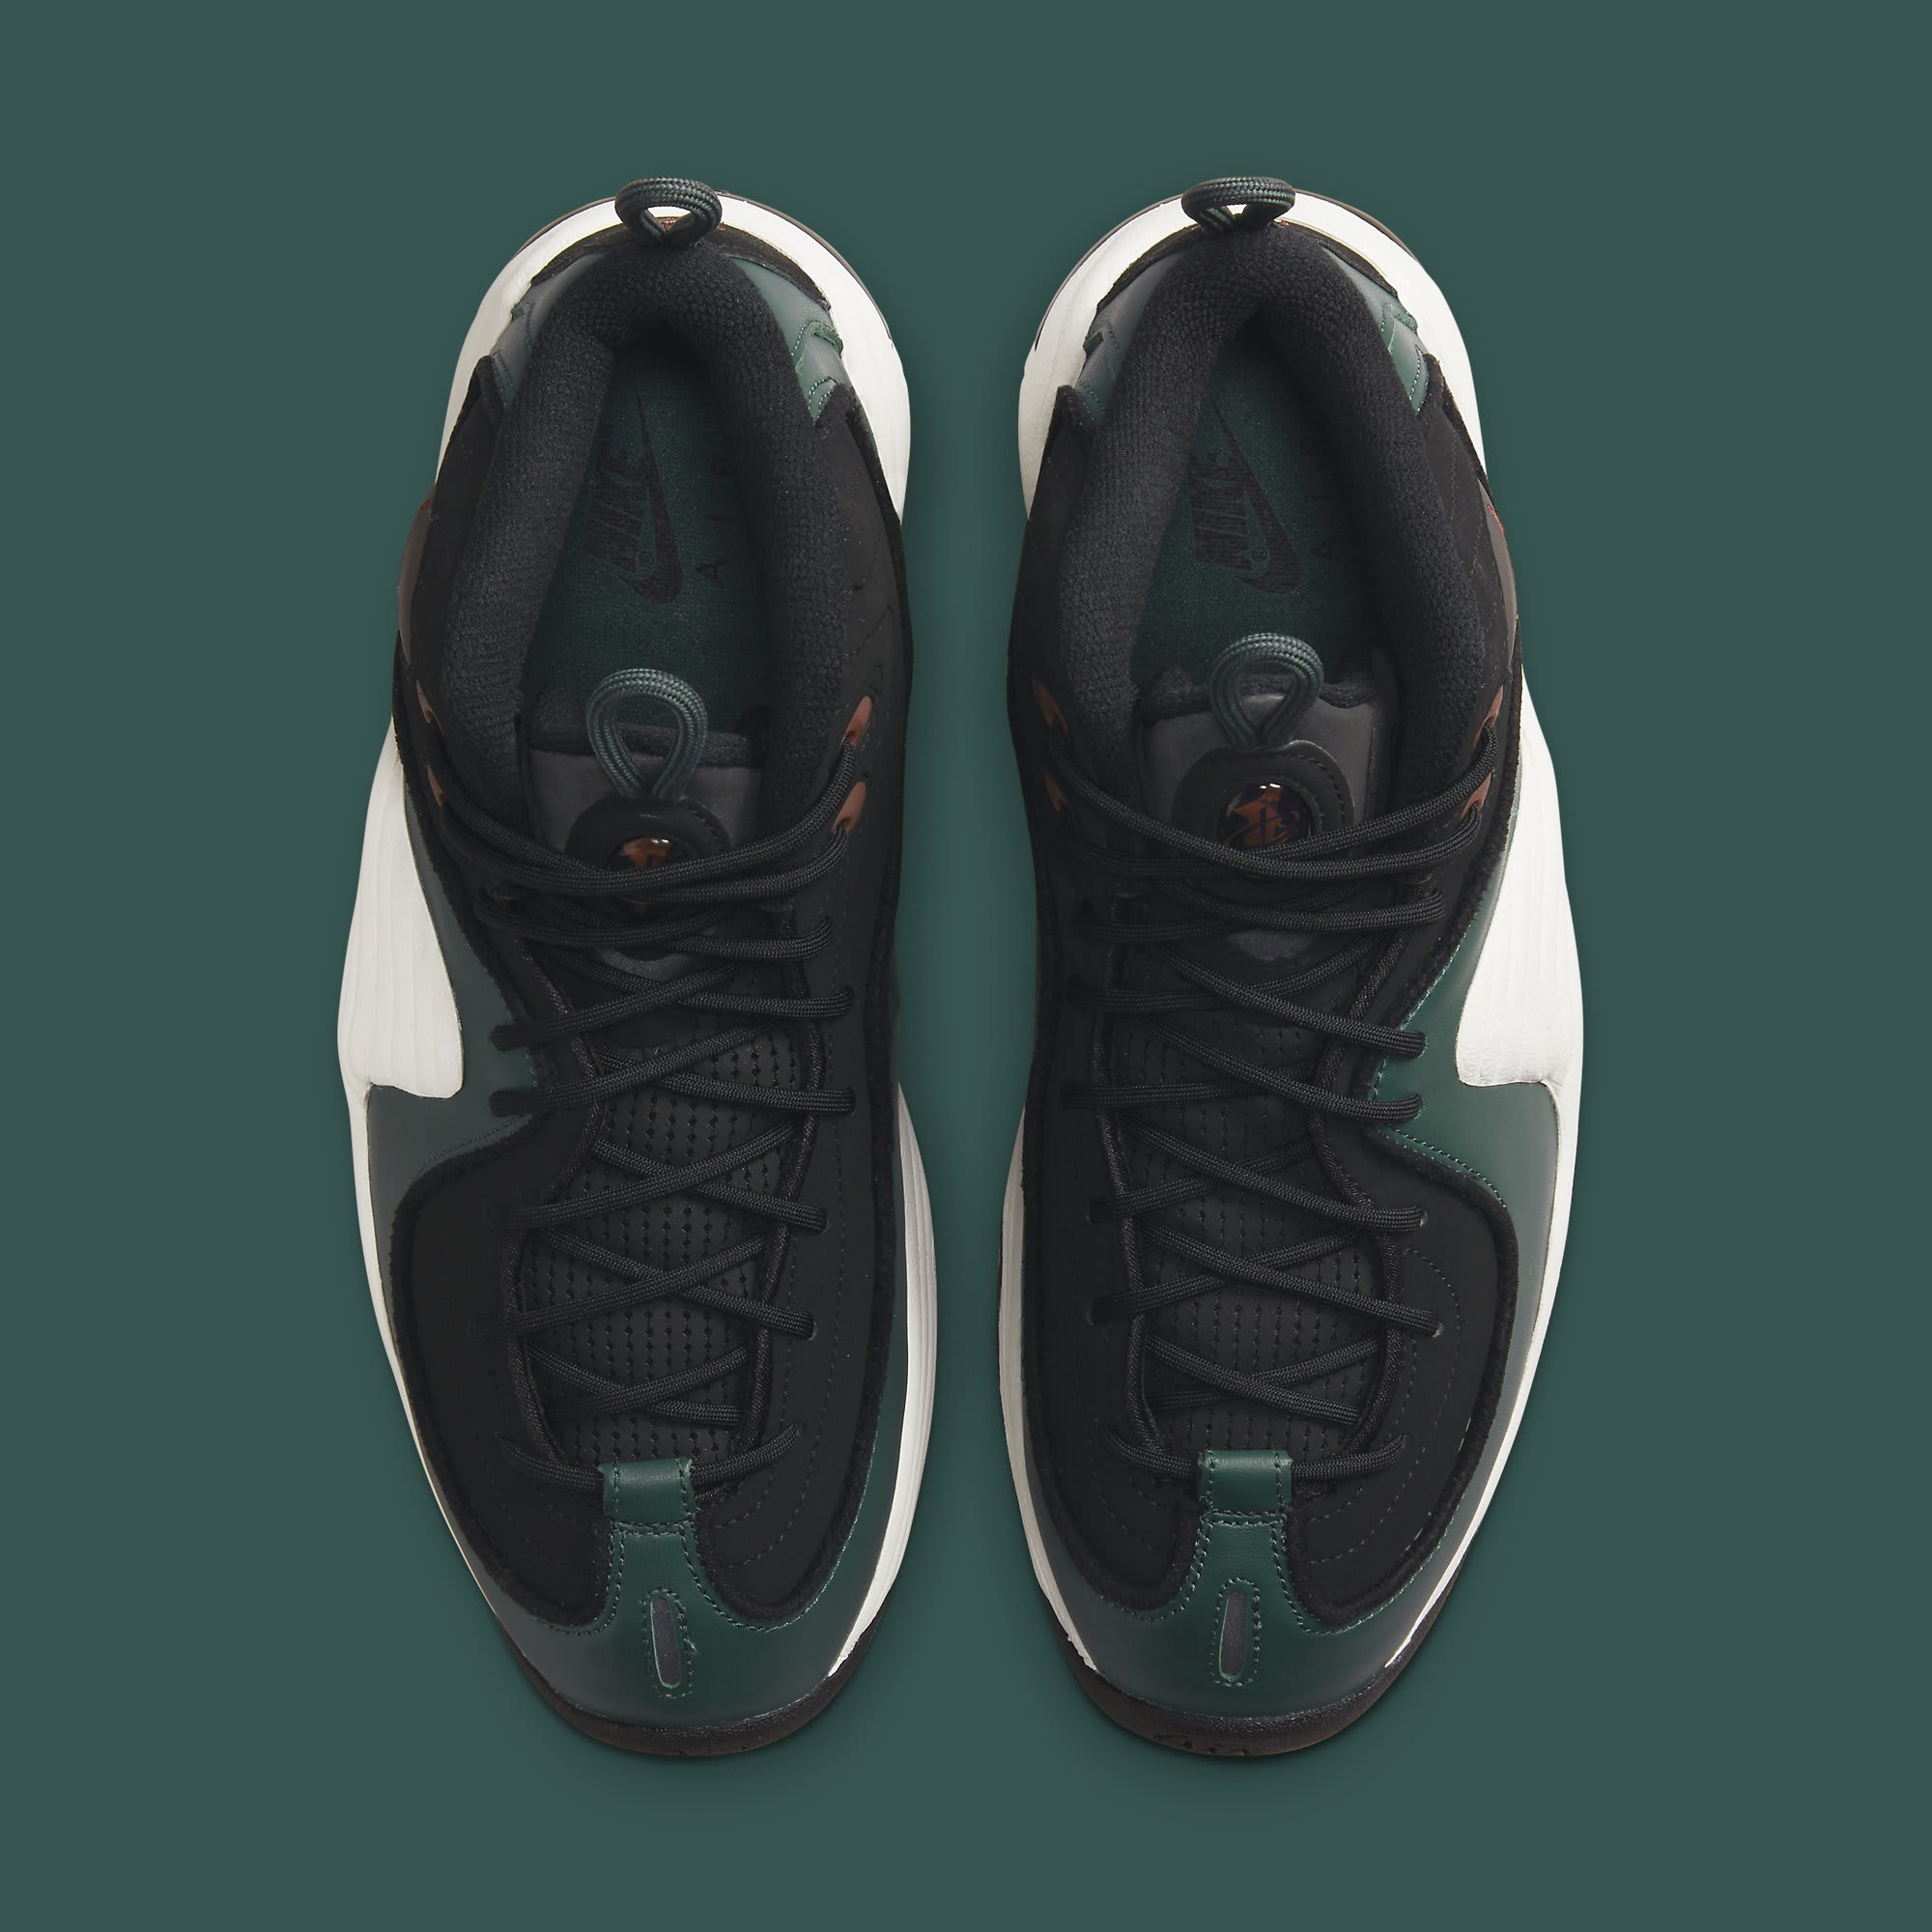 Nike Air Penny 2 Faded Spruce Release Date DV3465-001 Top